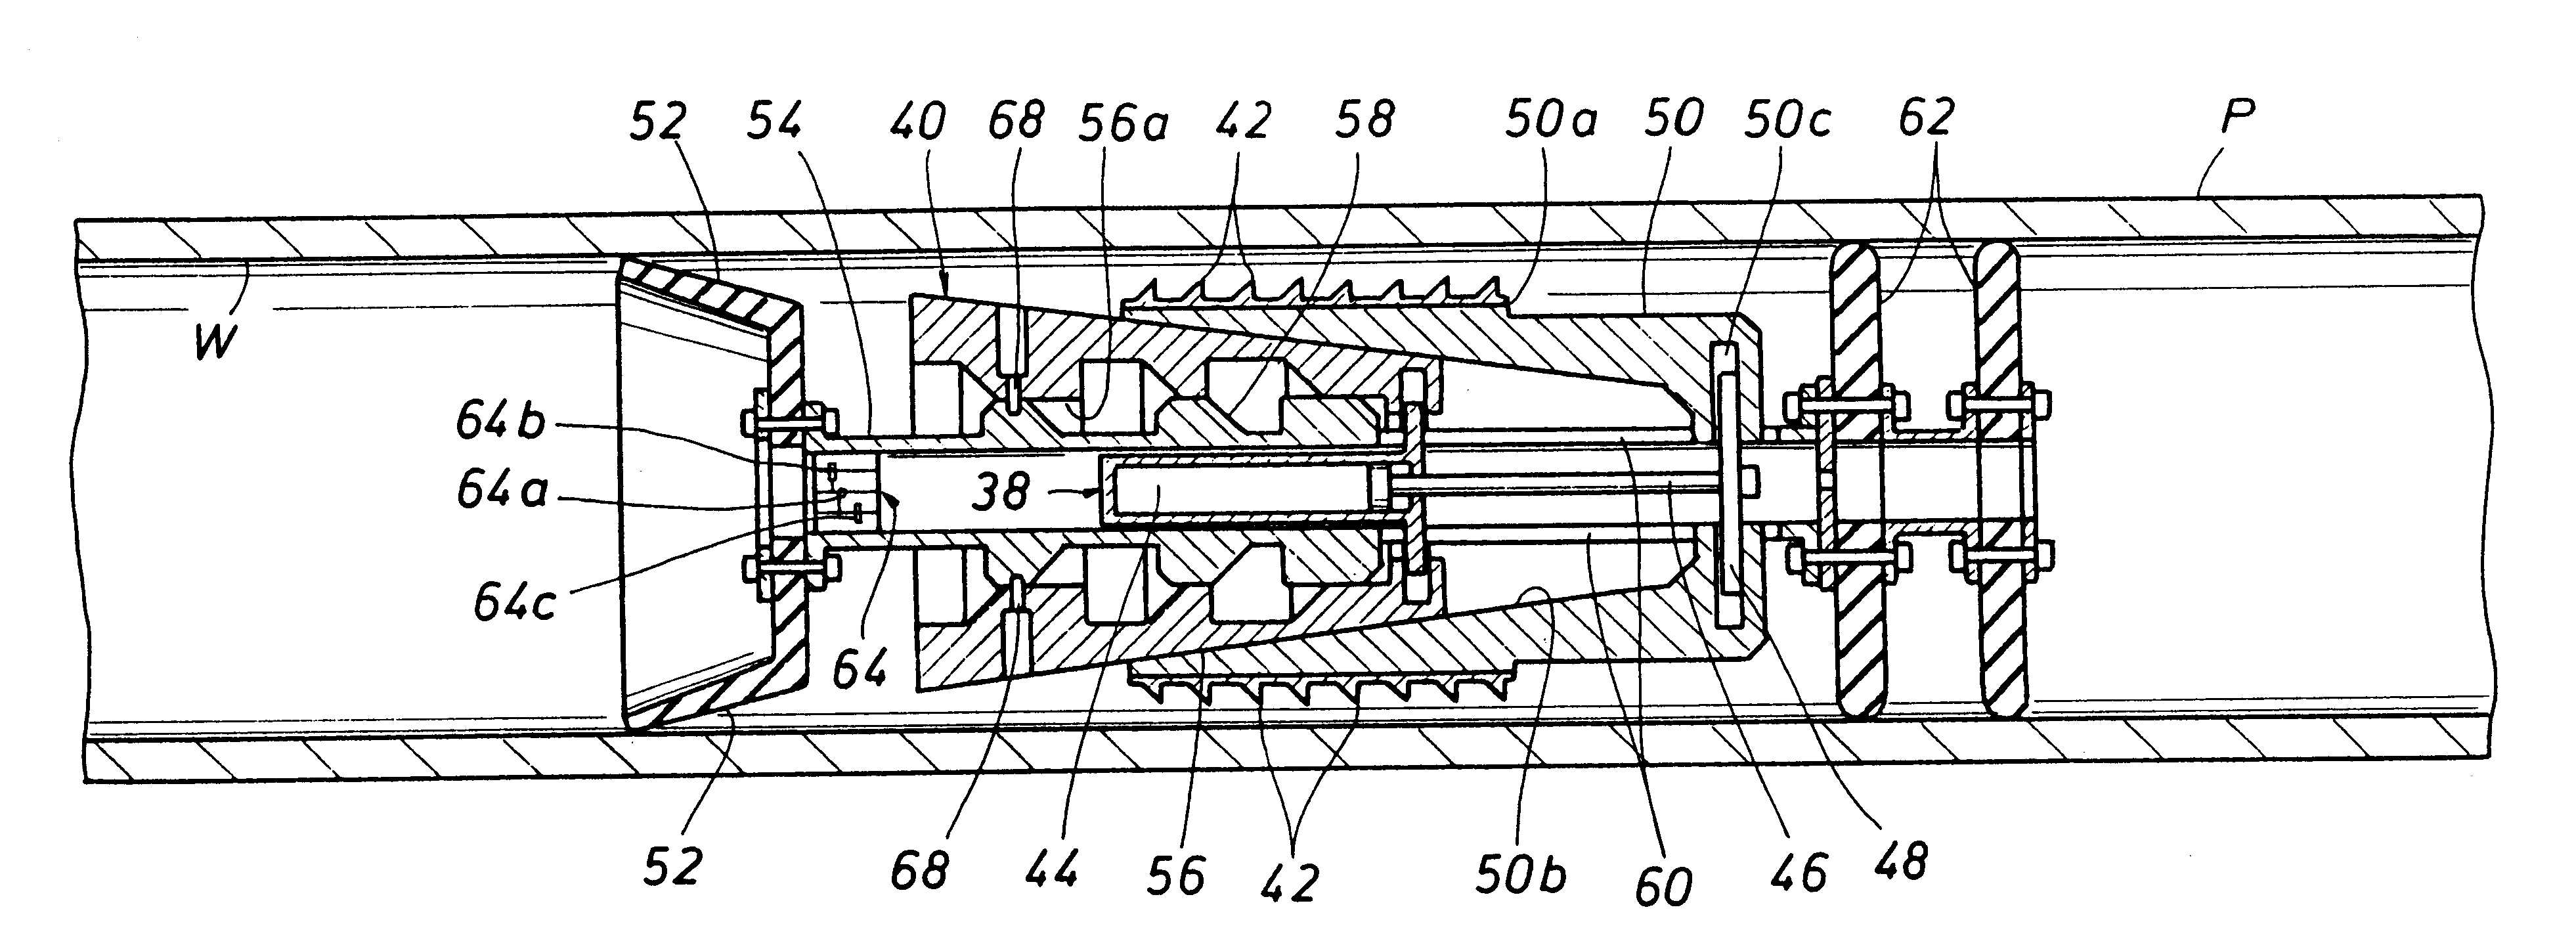 Method and apparatus for replacing damaged section of a subsea pipeline without loss of product or entry of seawater